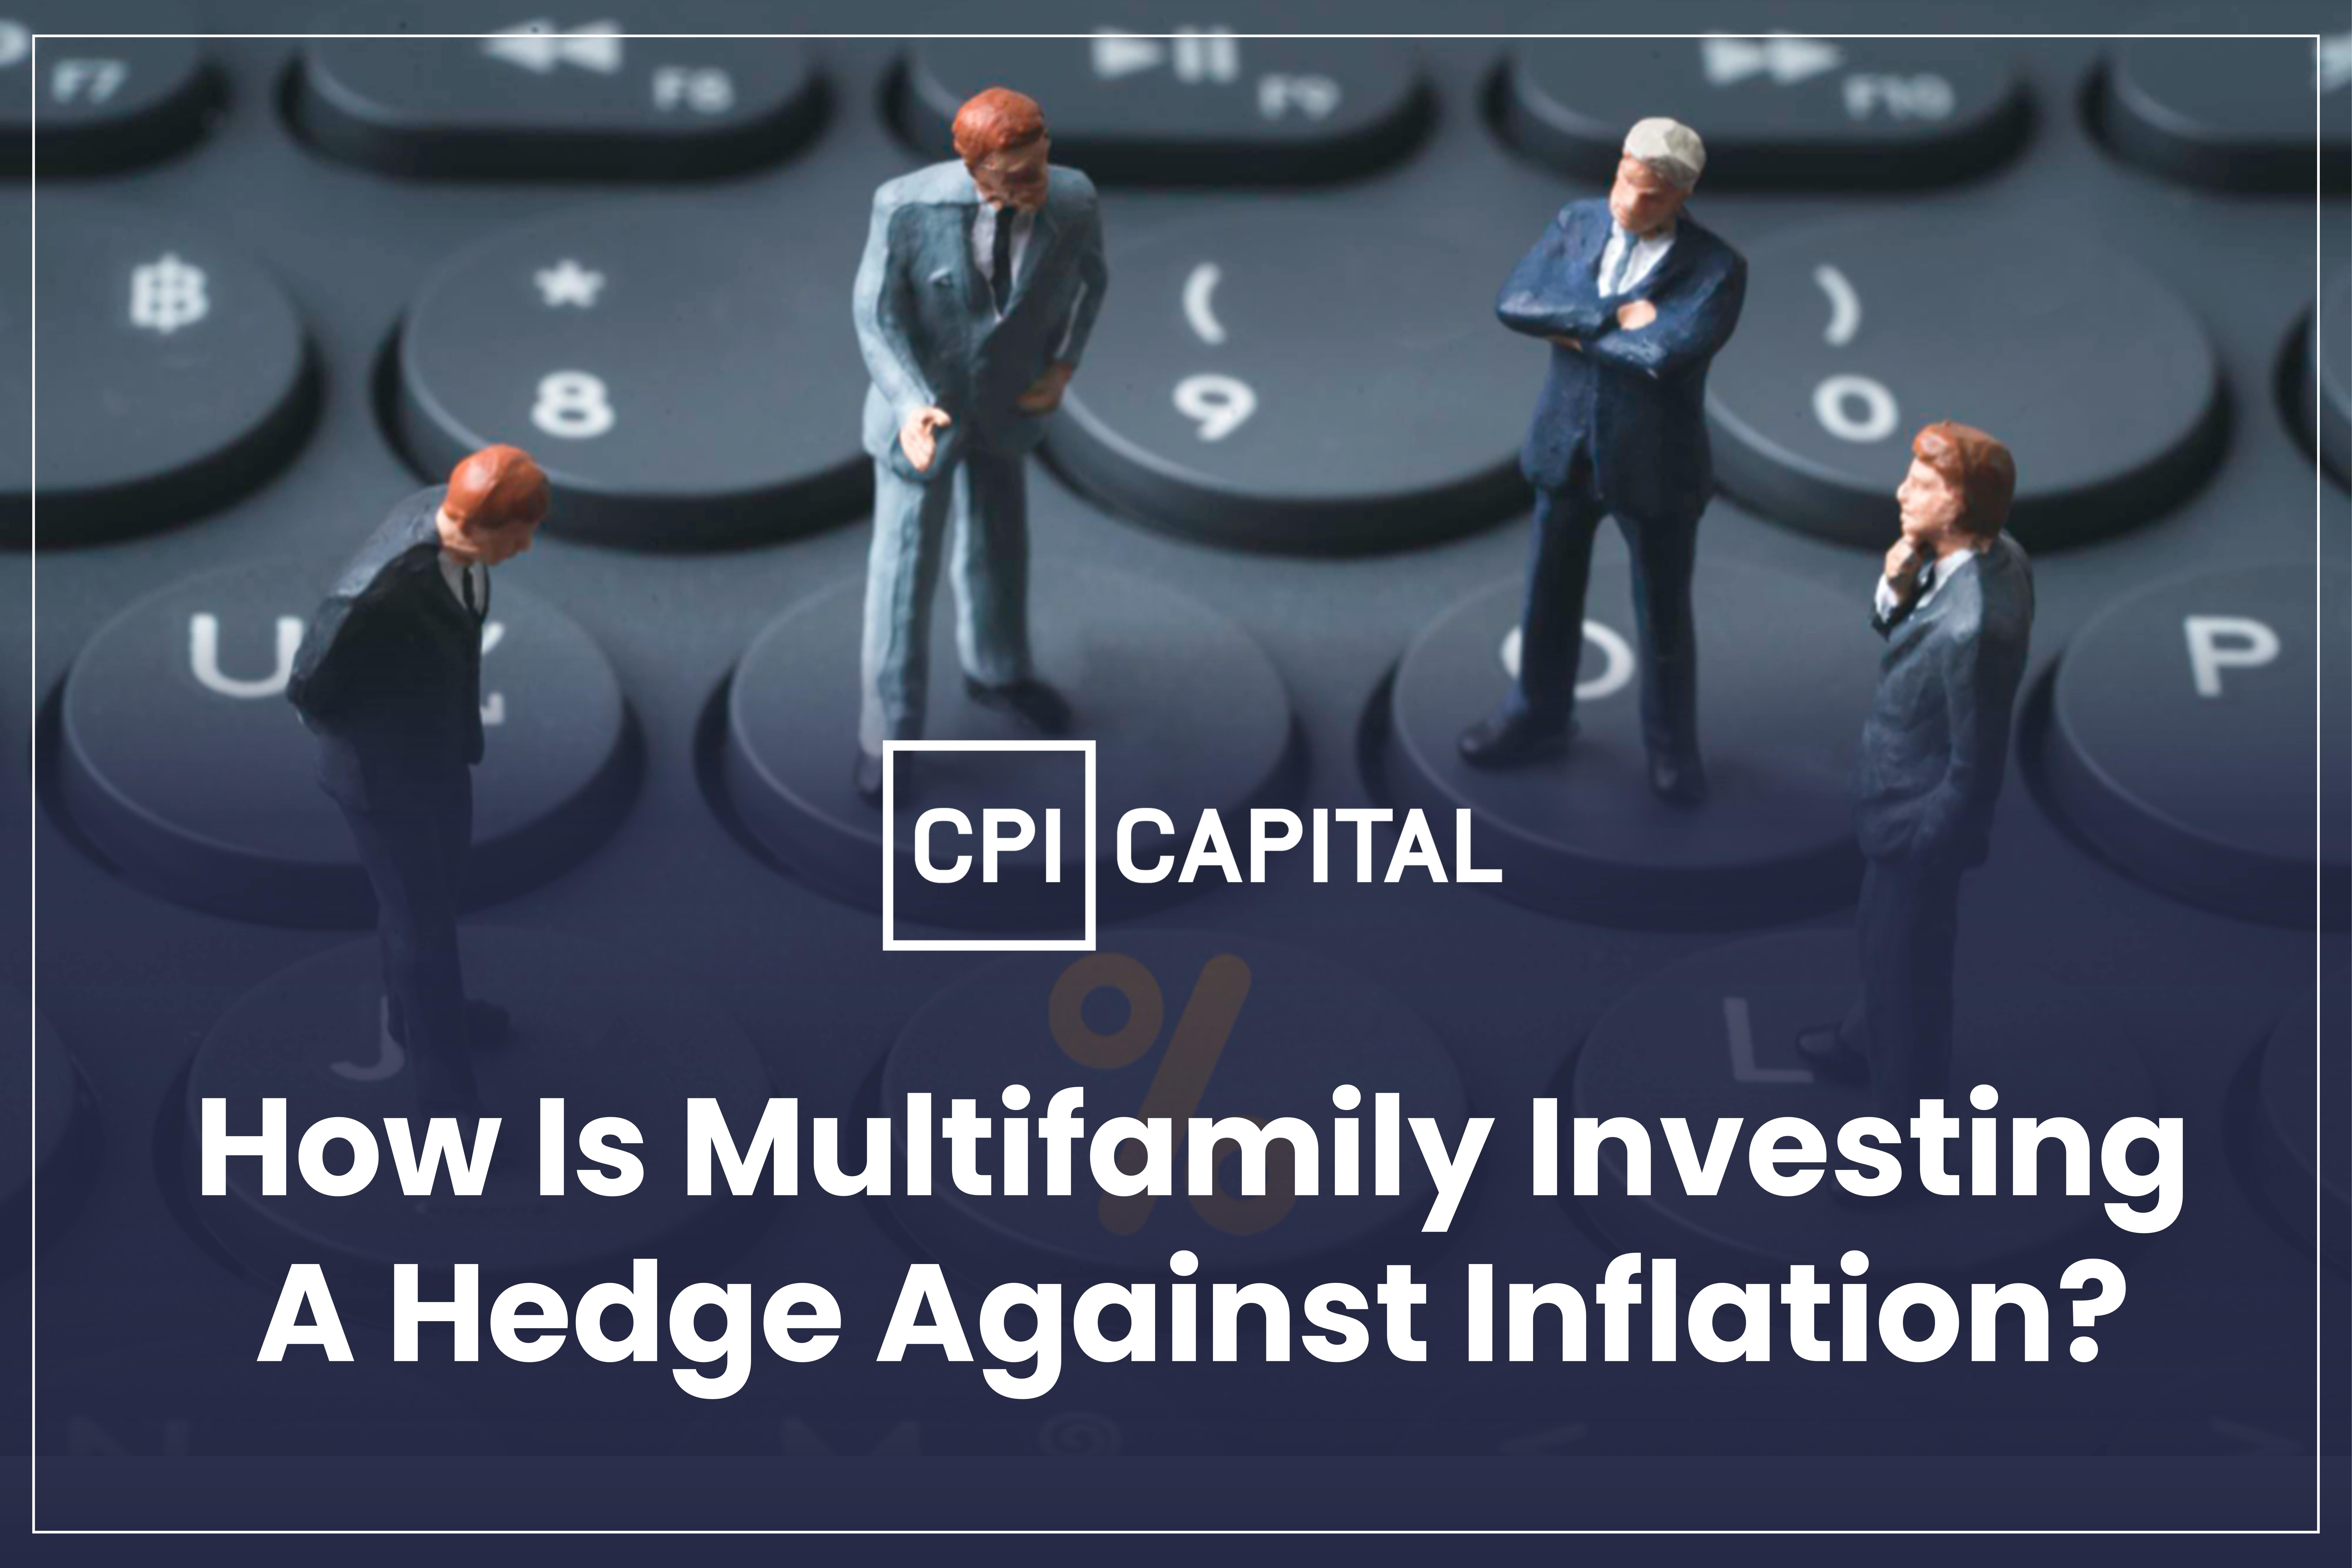 How Is Multifamily Investing A Hedge Against Inflation?